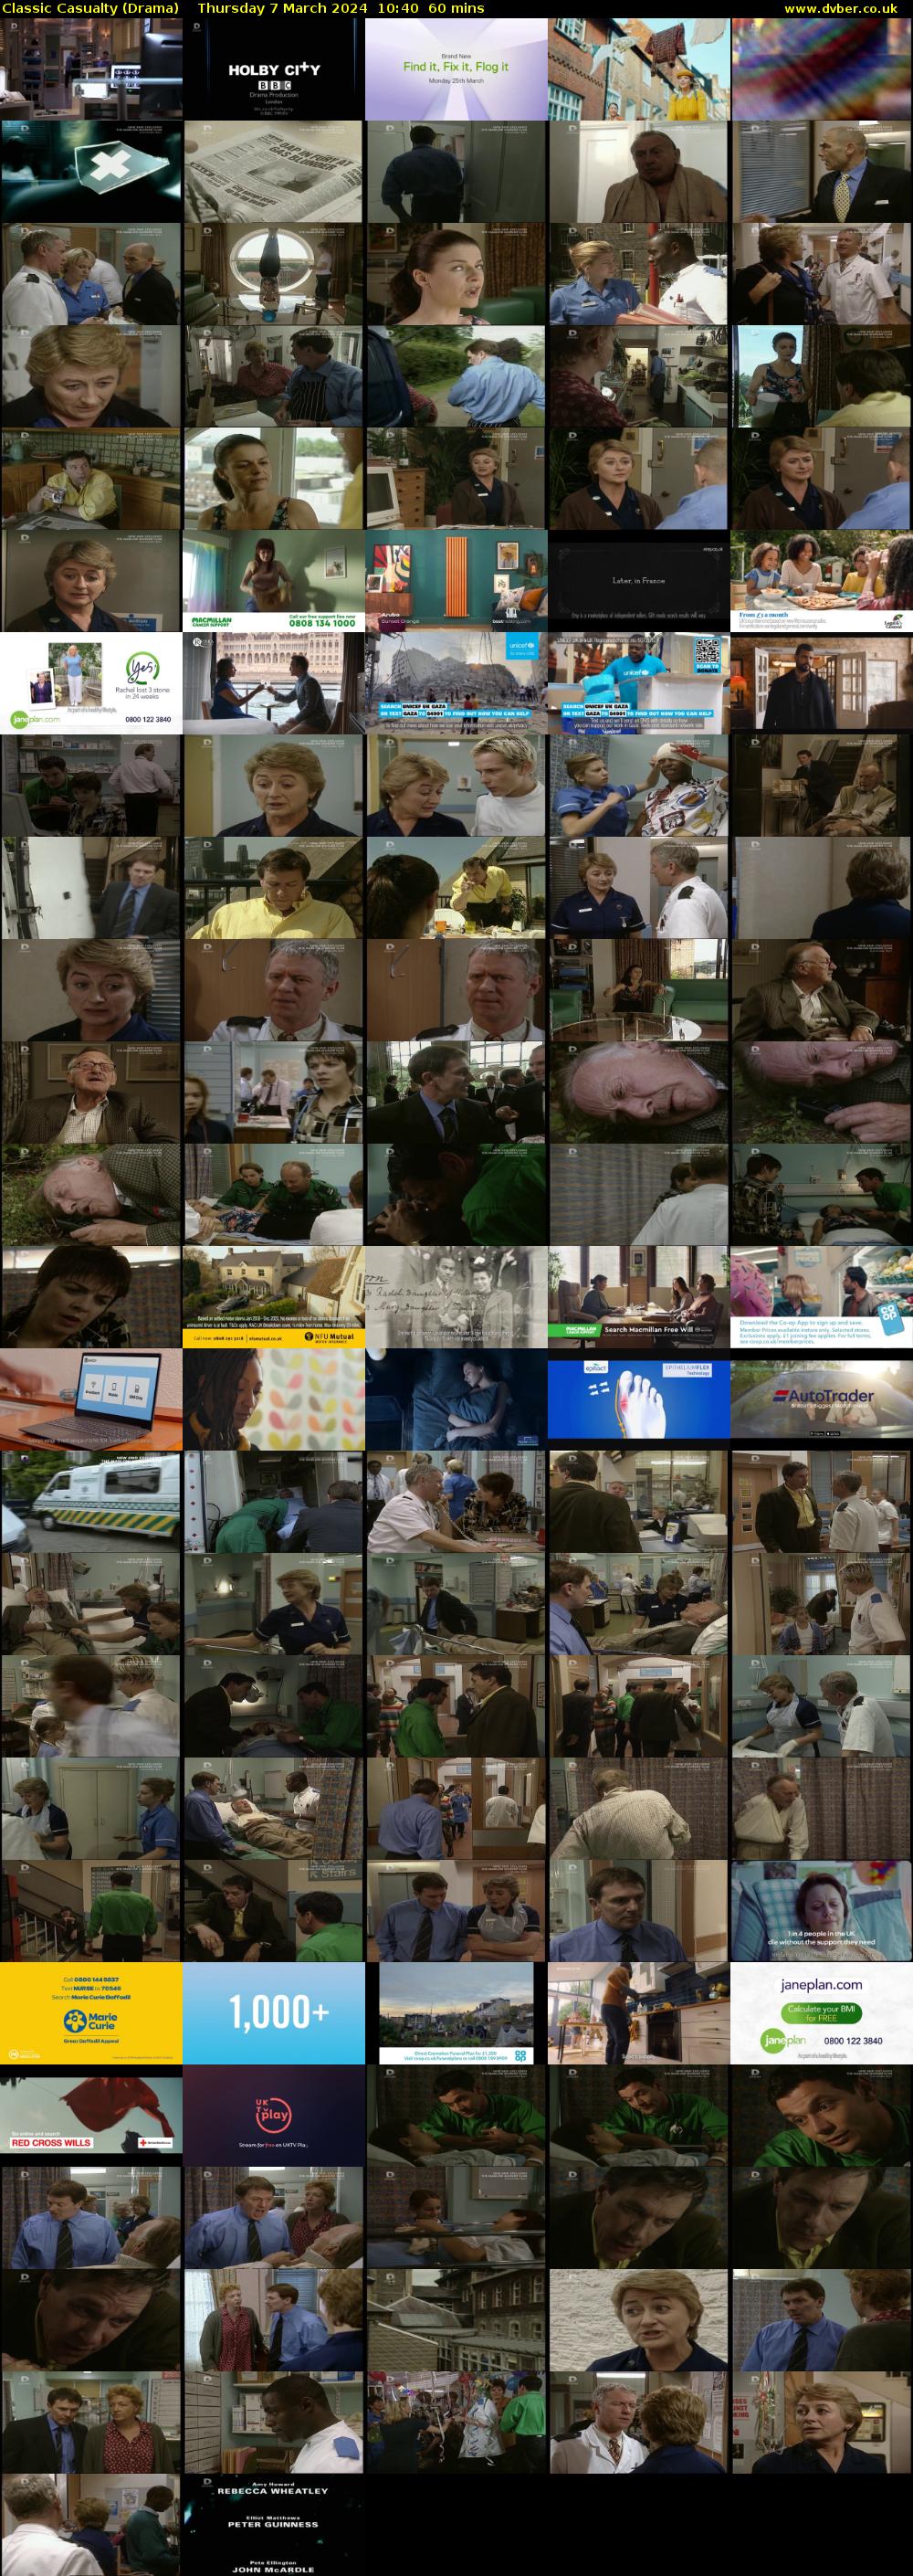 Classic Casualty (Drama) Thursday 7 March 2024 10:40 - 11:40